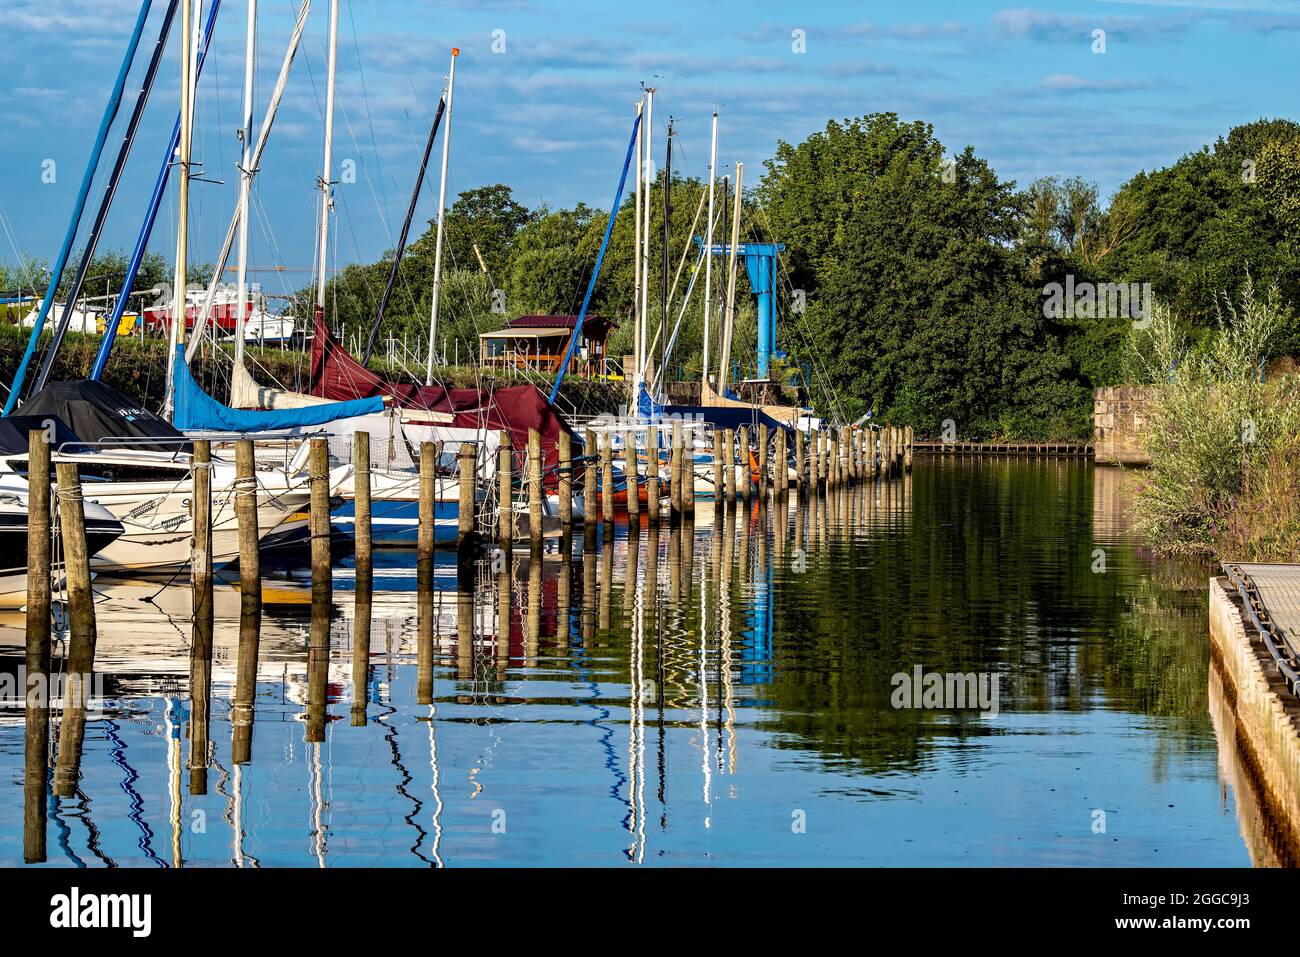 Vertical shot of a marina on the Main near Karlstein, Germany Stock Photo